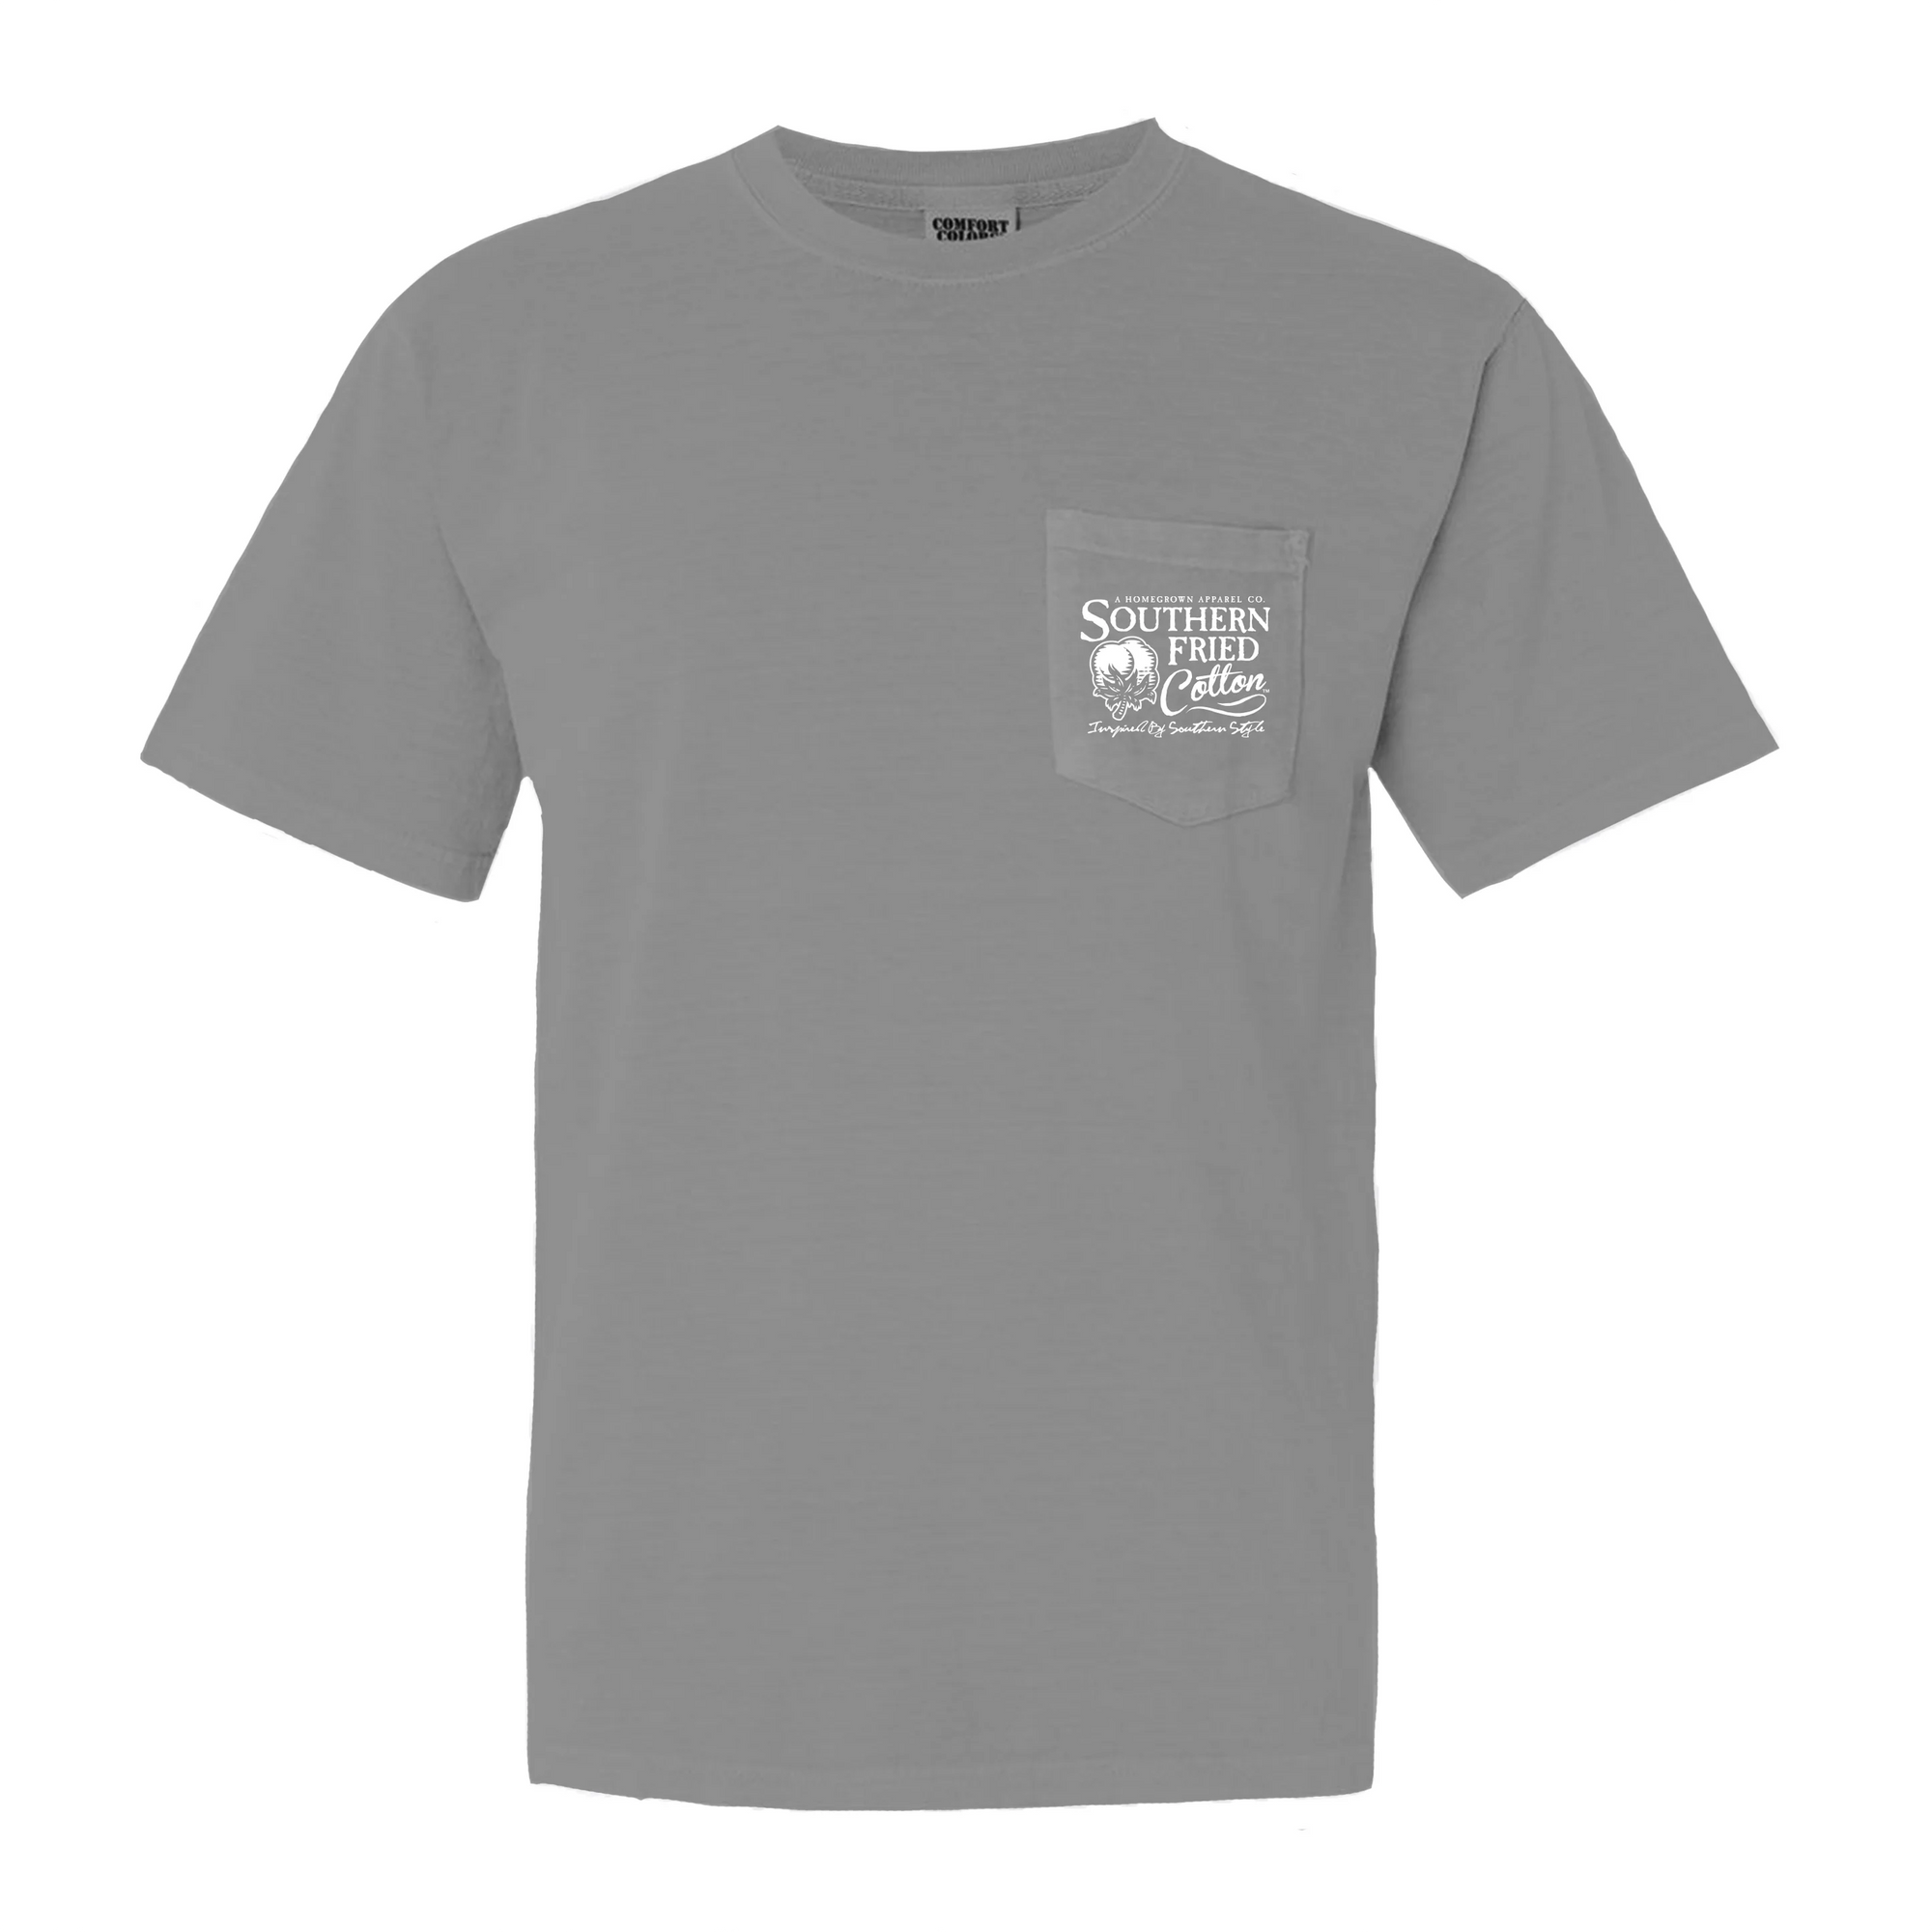 Southern Fried Cotton Bait & Tackle Tee